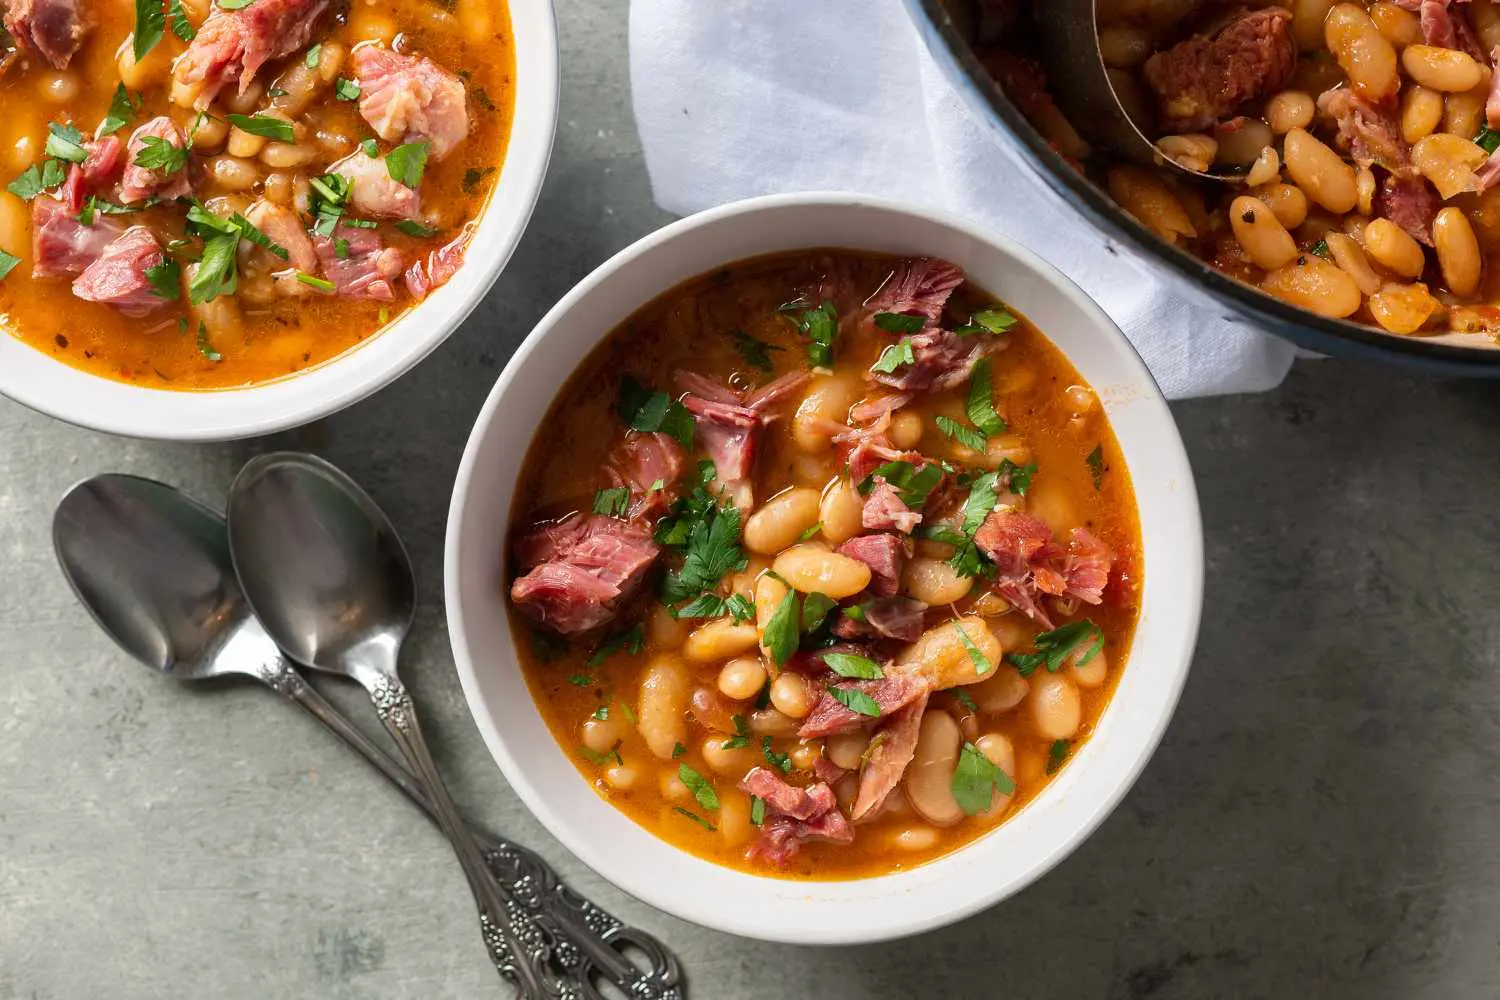 smoked ham soup recipe - What is the difference between a ham hock and a ham shank